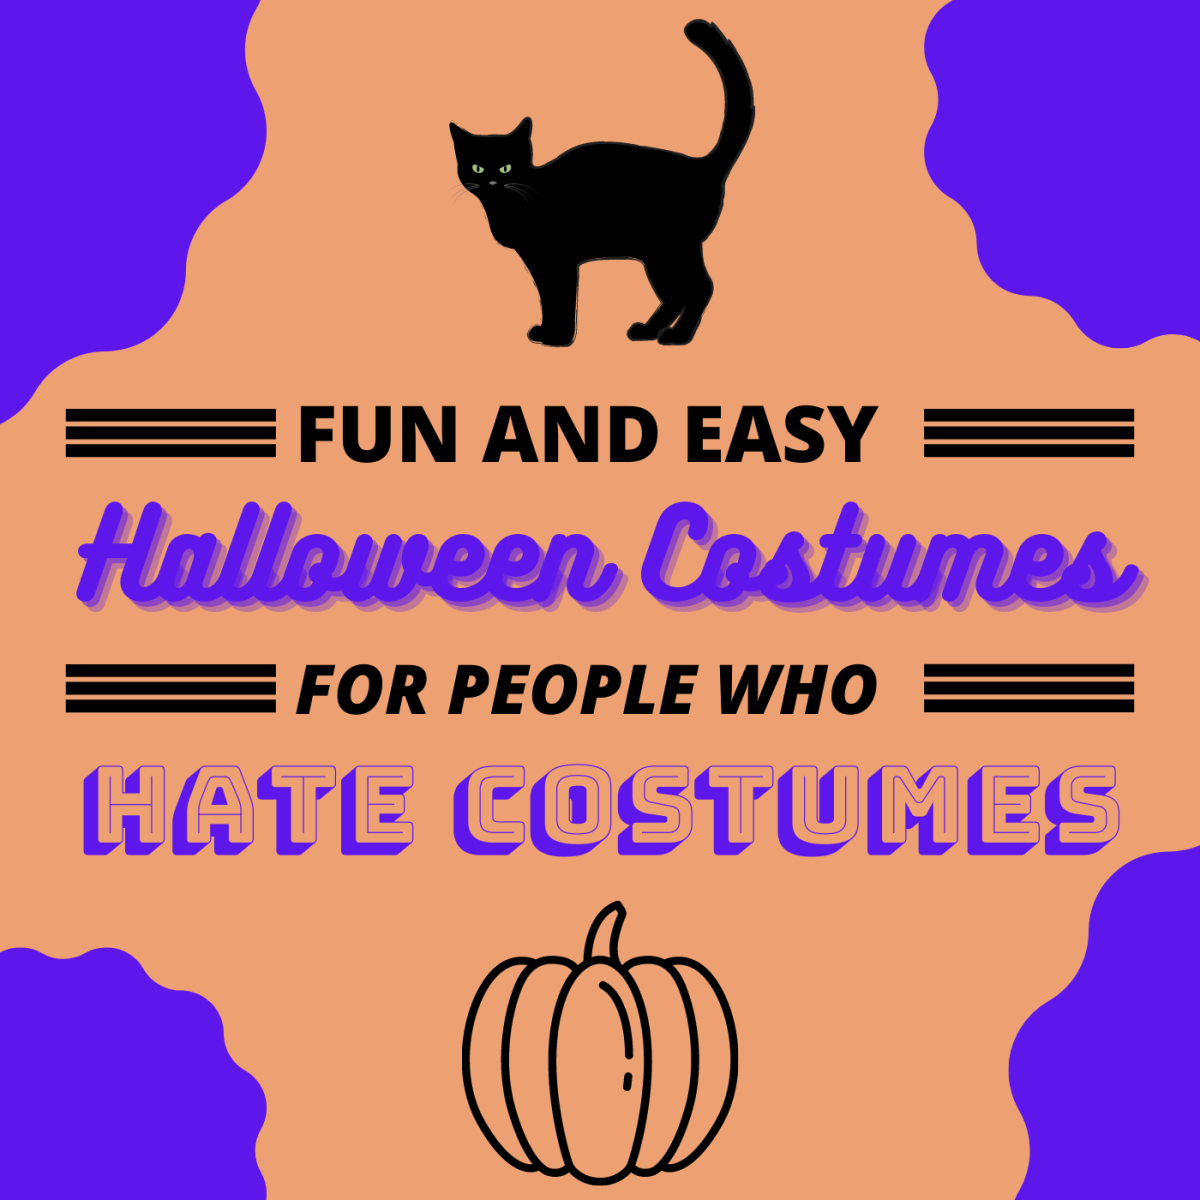 Hate thinking of costume ideas? Pick one of the easy-to-put-together costumes on this list.